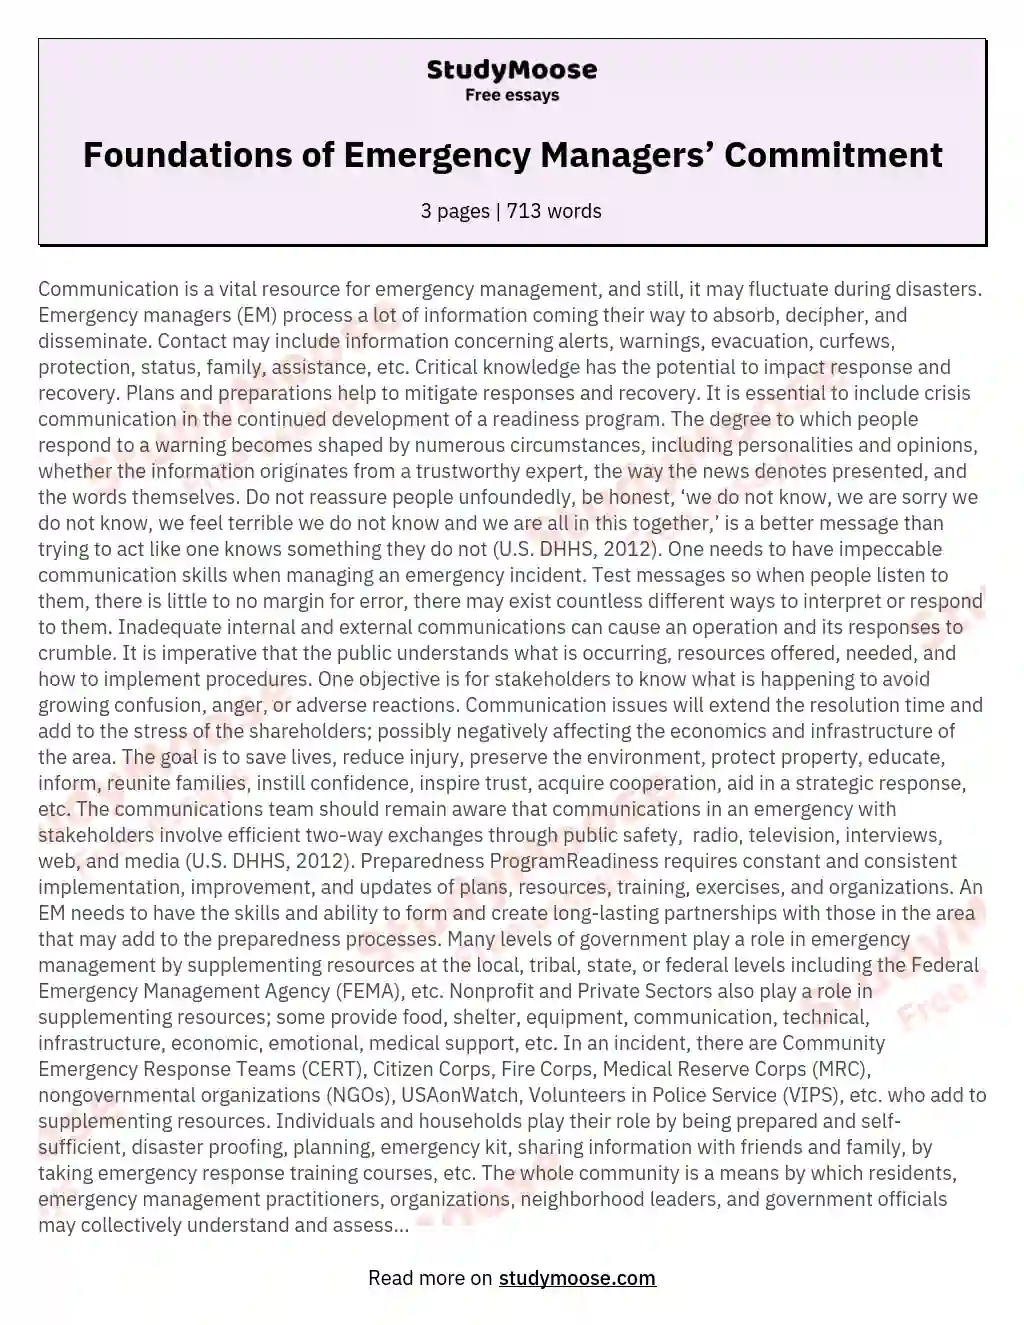 Foundations of Emergency Managers’ Commitment essay